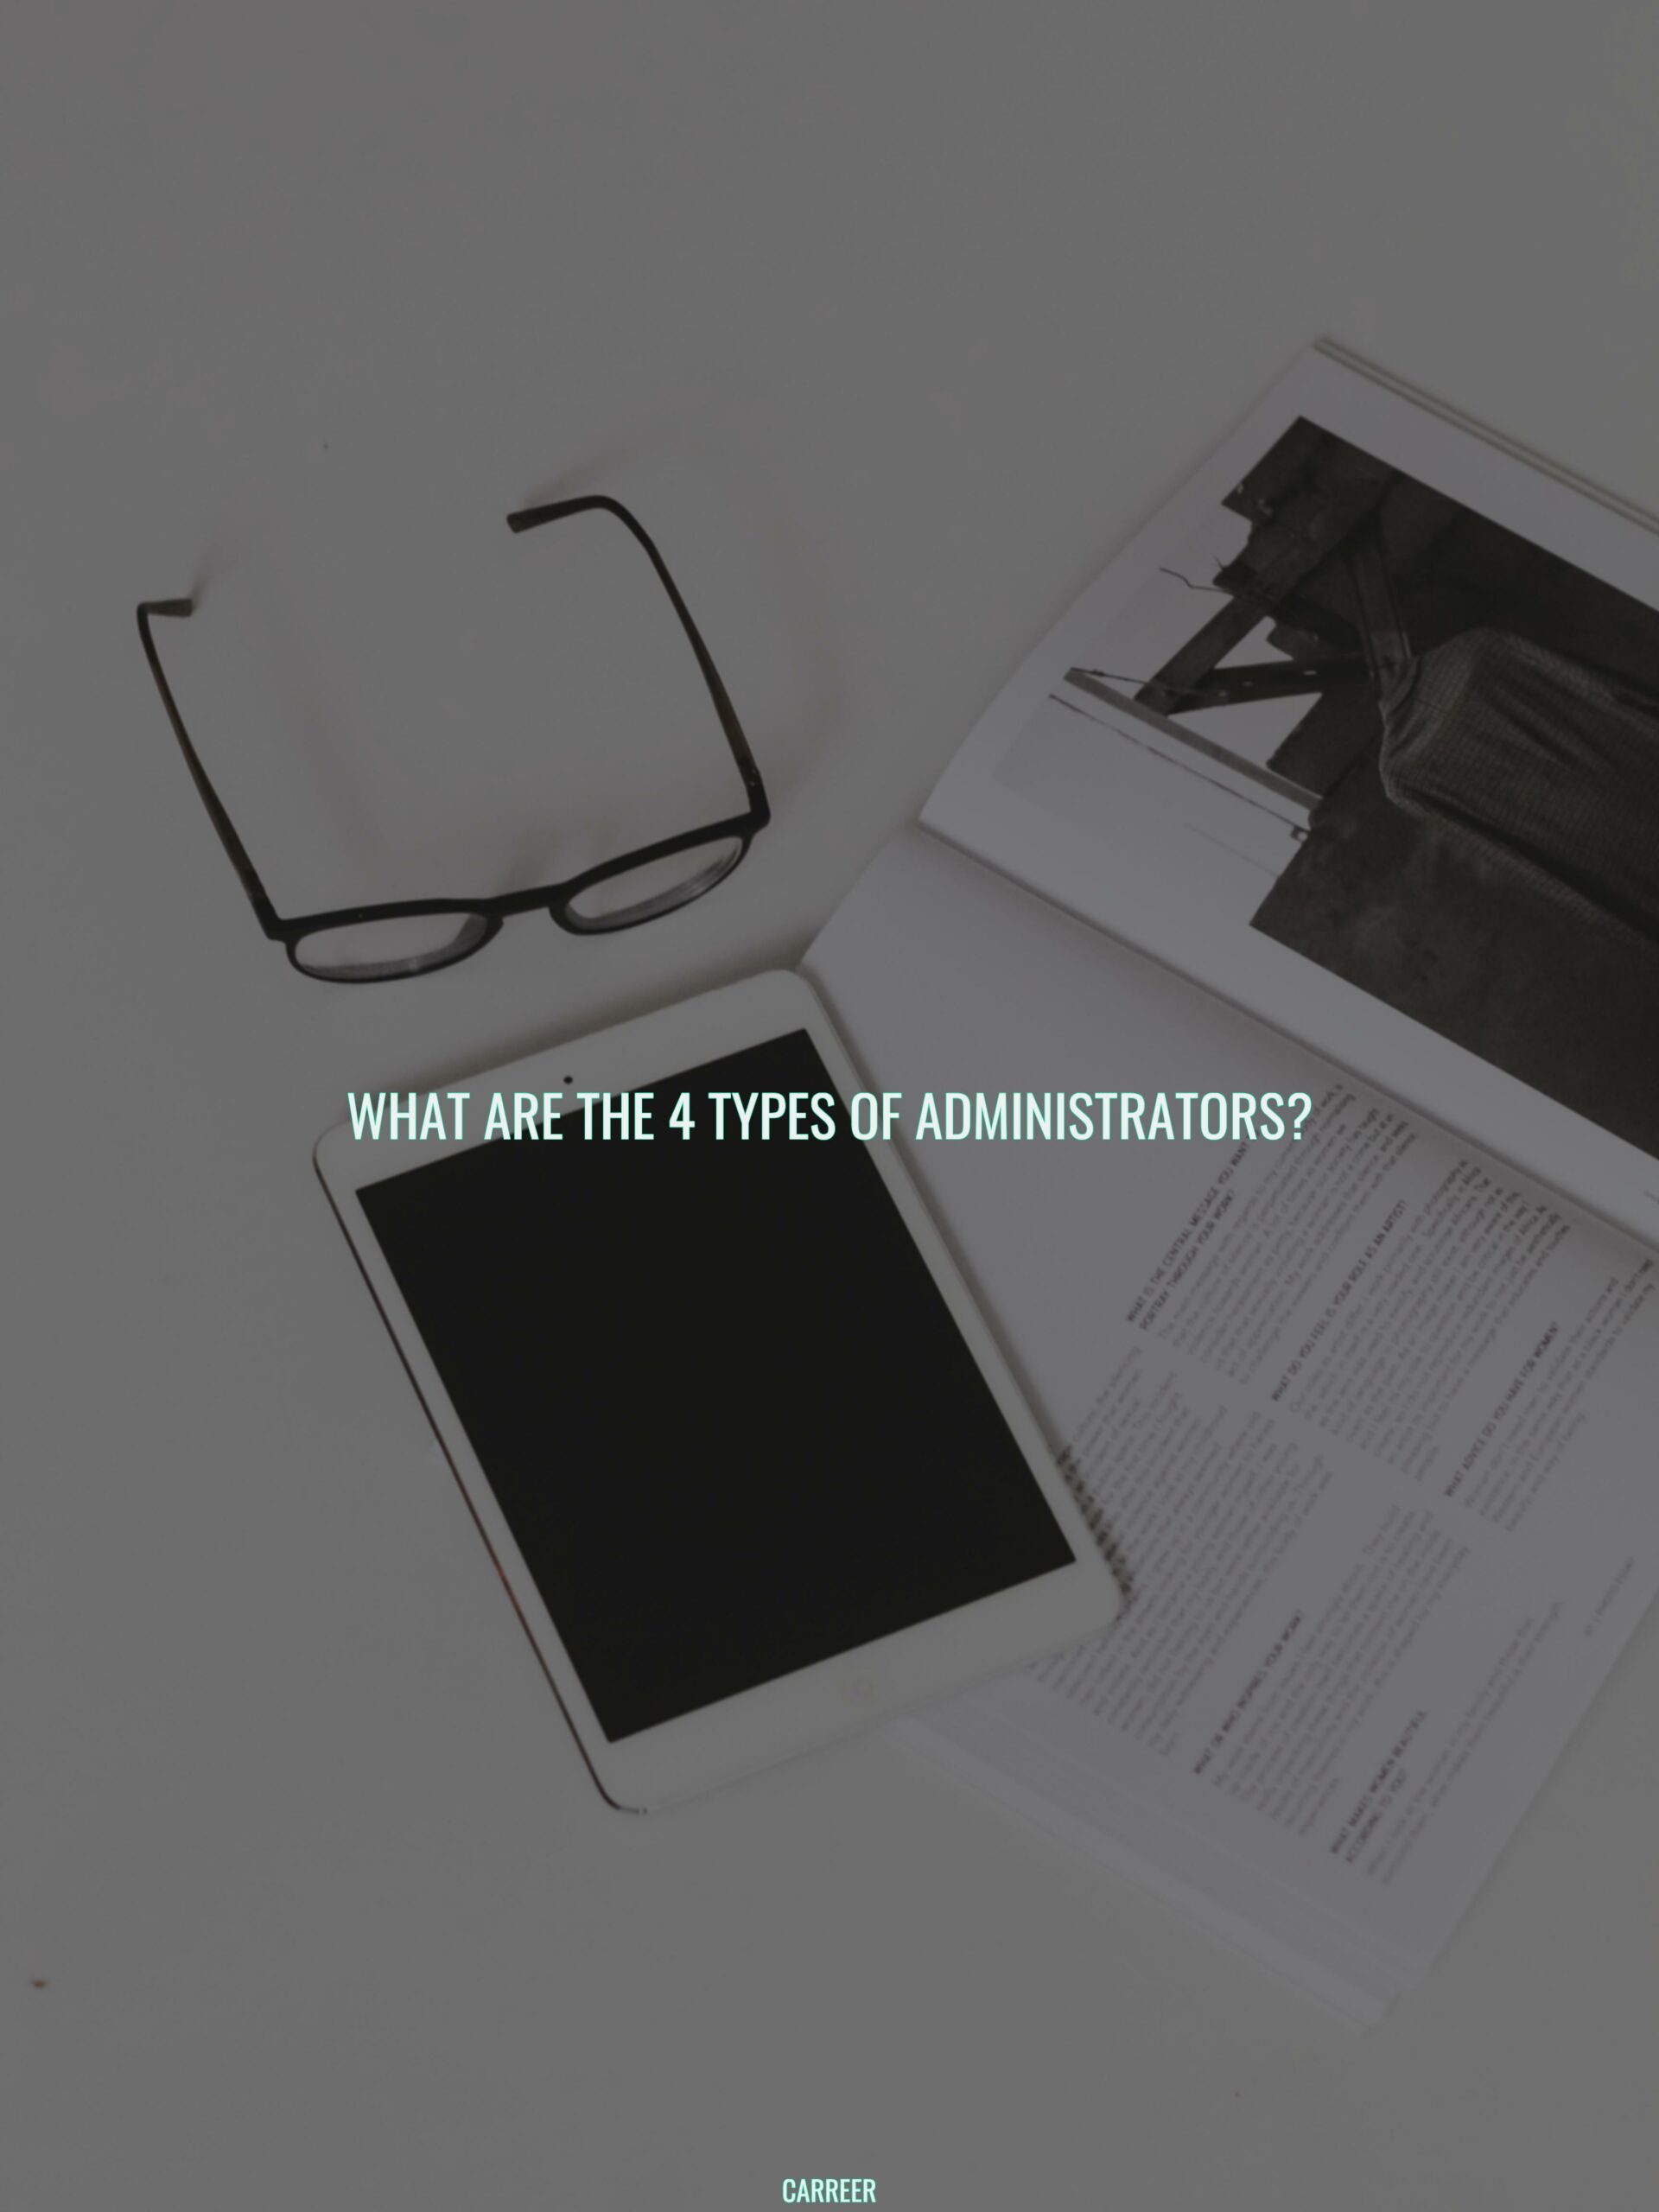 What are the 4 types of administrators?